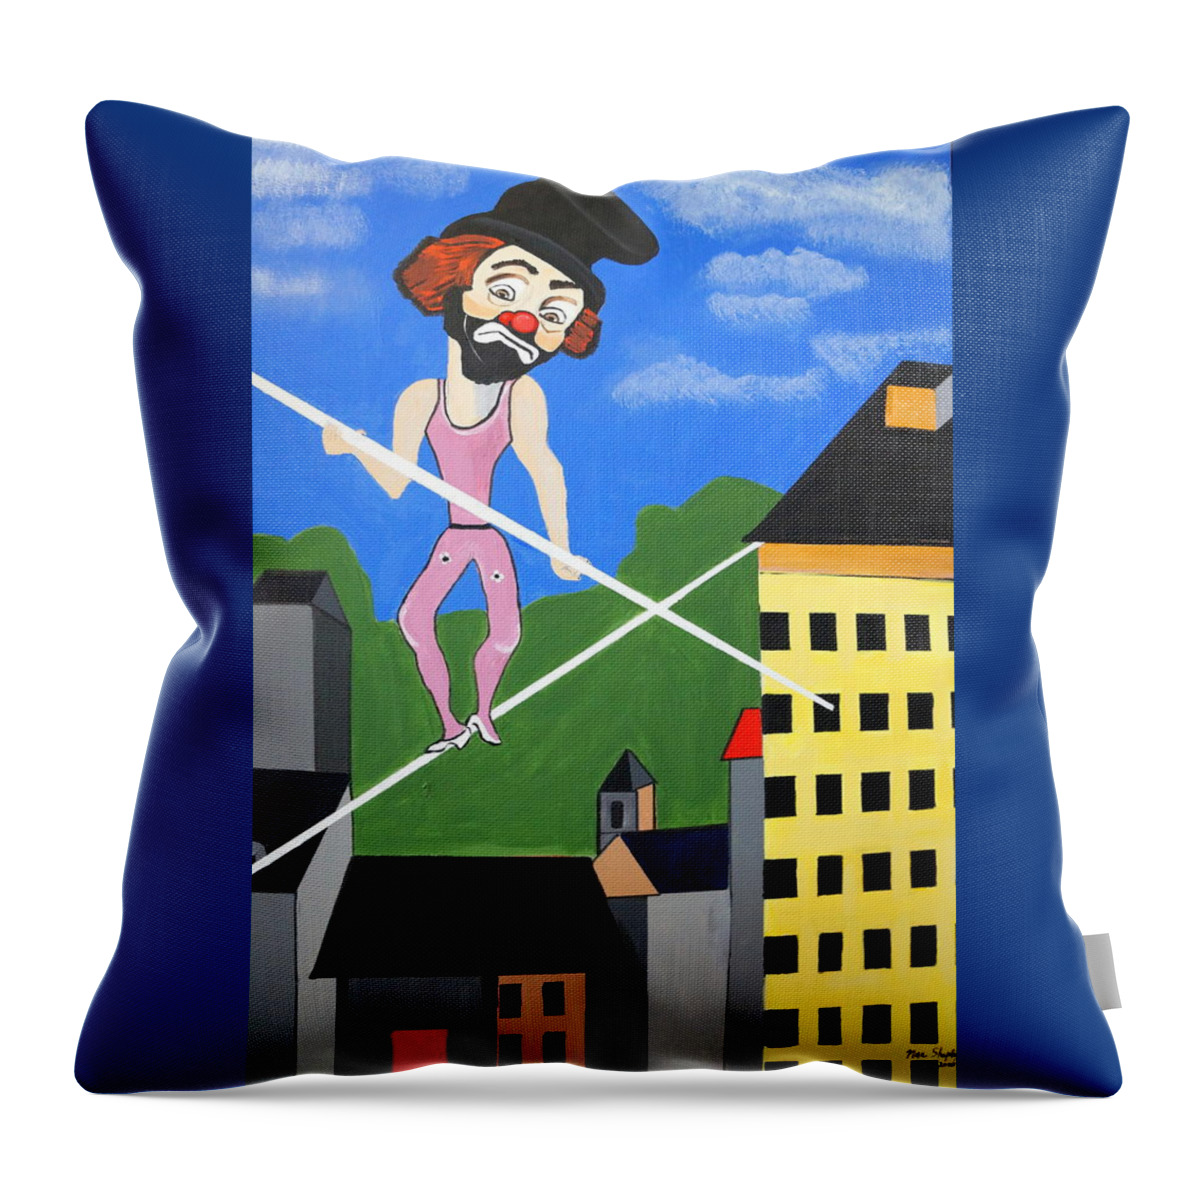 Clown Tight Roping Throw Pillow featuring the painting Clown Tight Roping by Nora Shepley